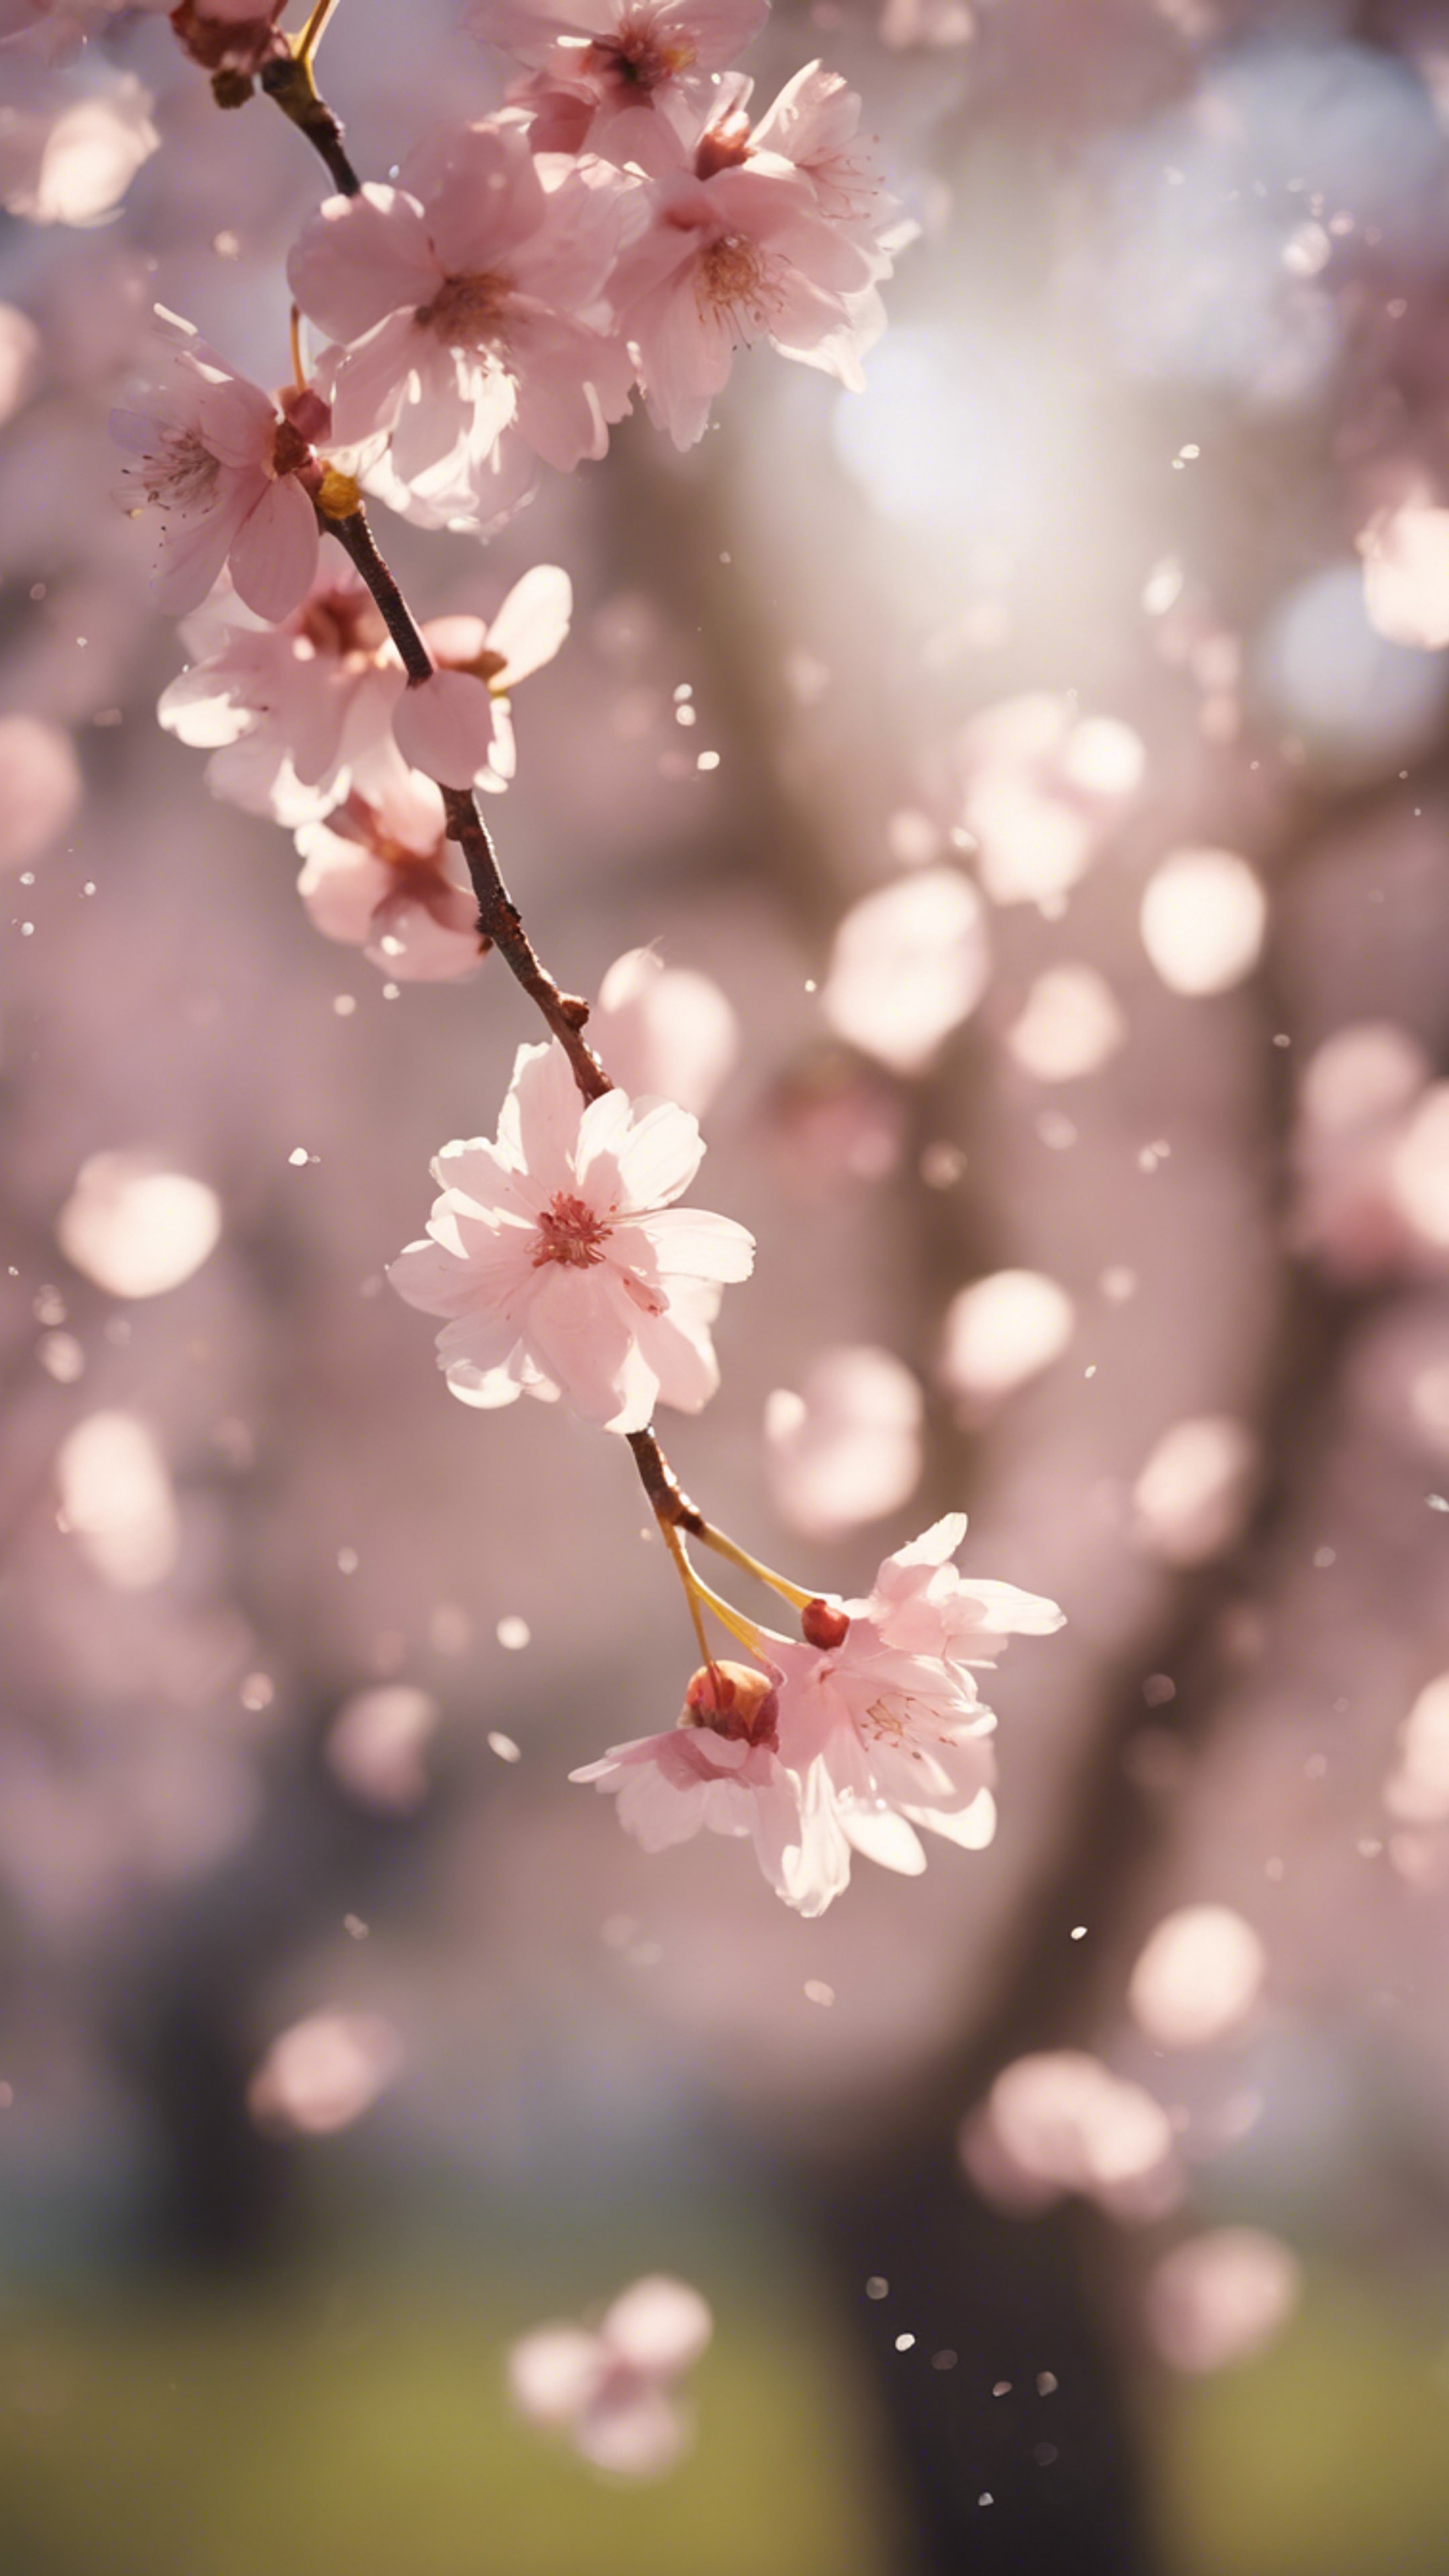 Tiny, light pink cherry blossom petals falling gently from a tree in the morning light.壁紙[bcff163445454d48bfbe]